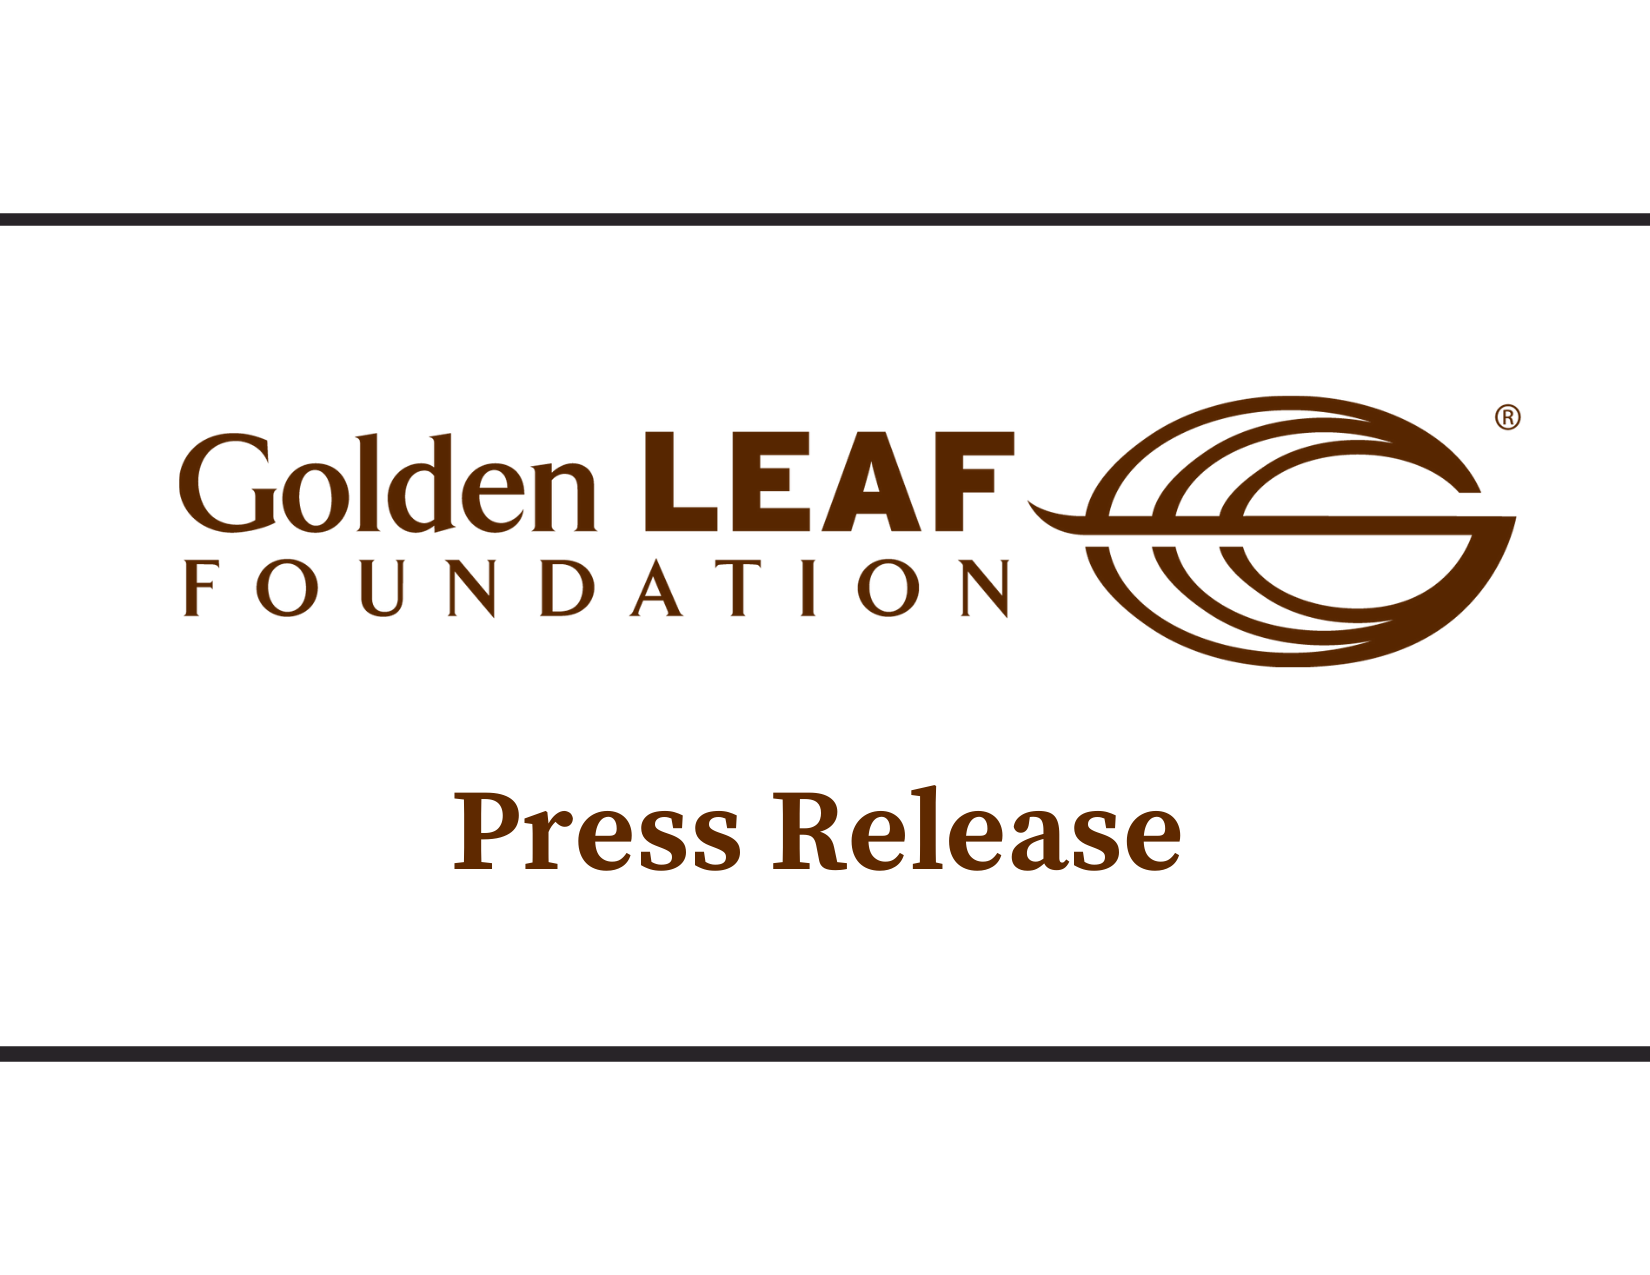 Golden LEAF Board awards $2.4M in funding, elects board officers and committee chairs, works on development of strategic plan